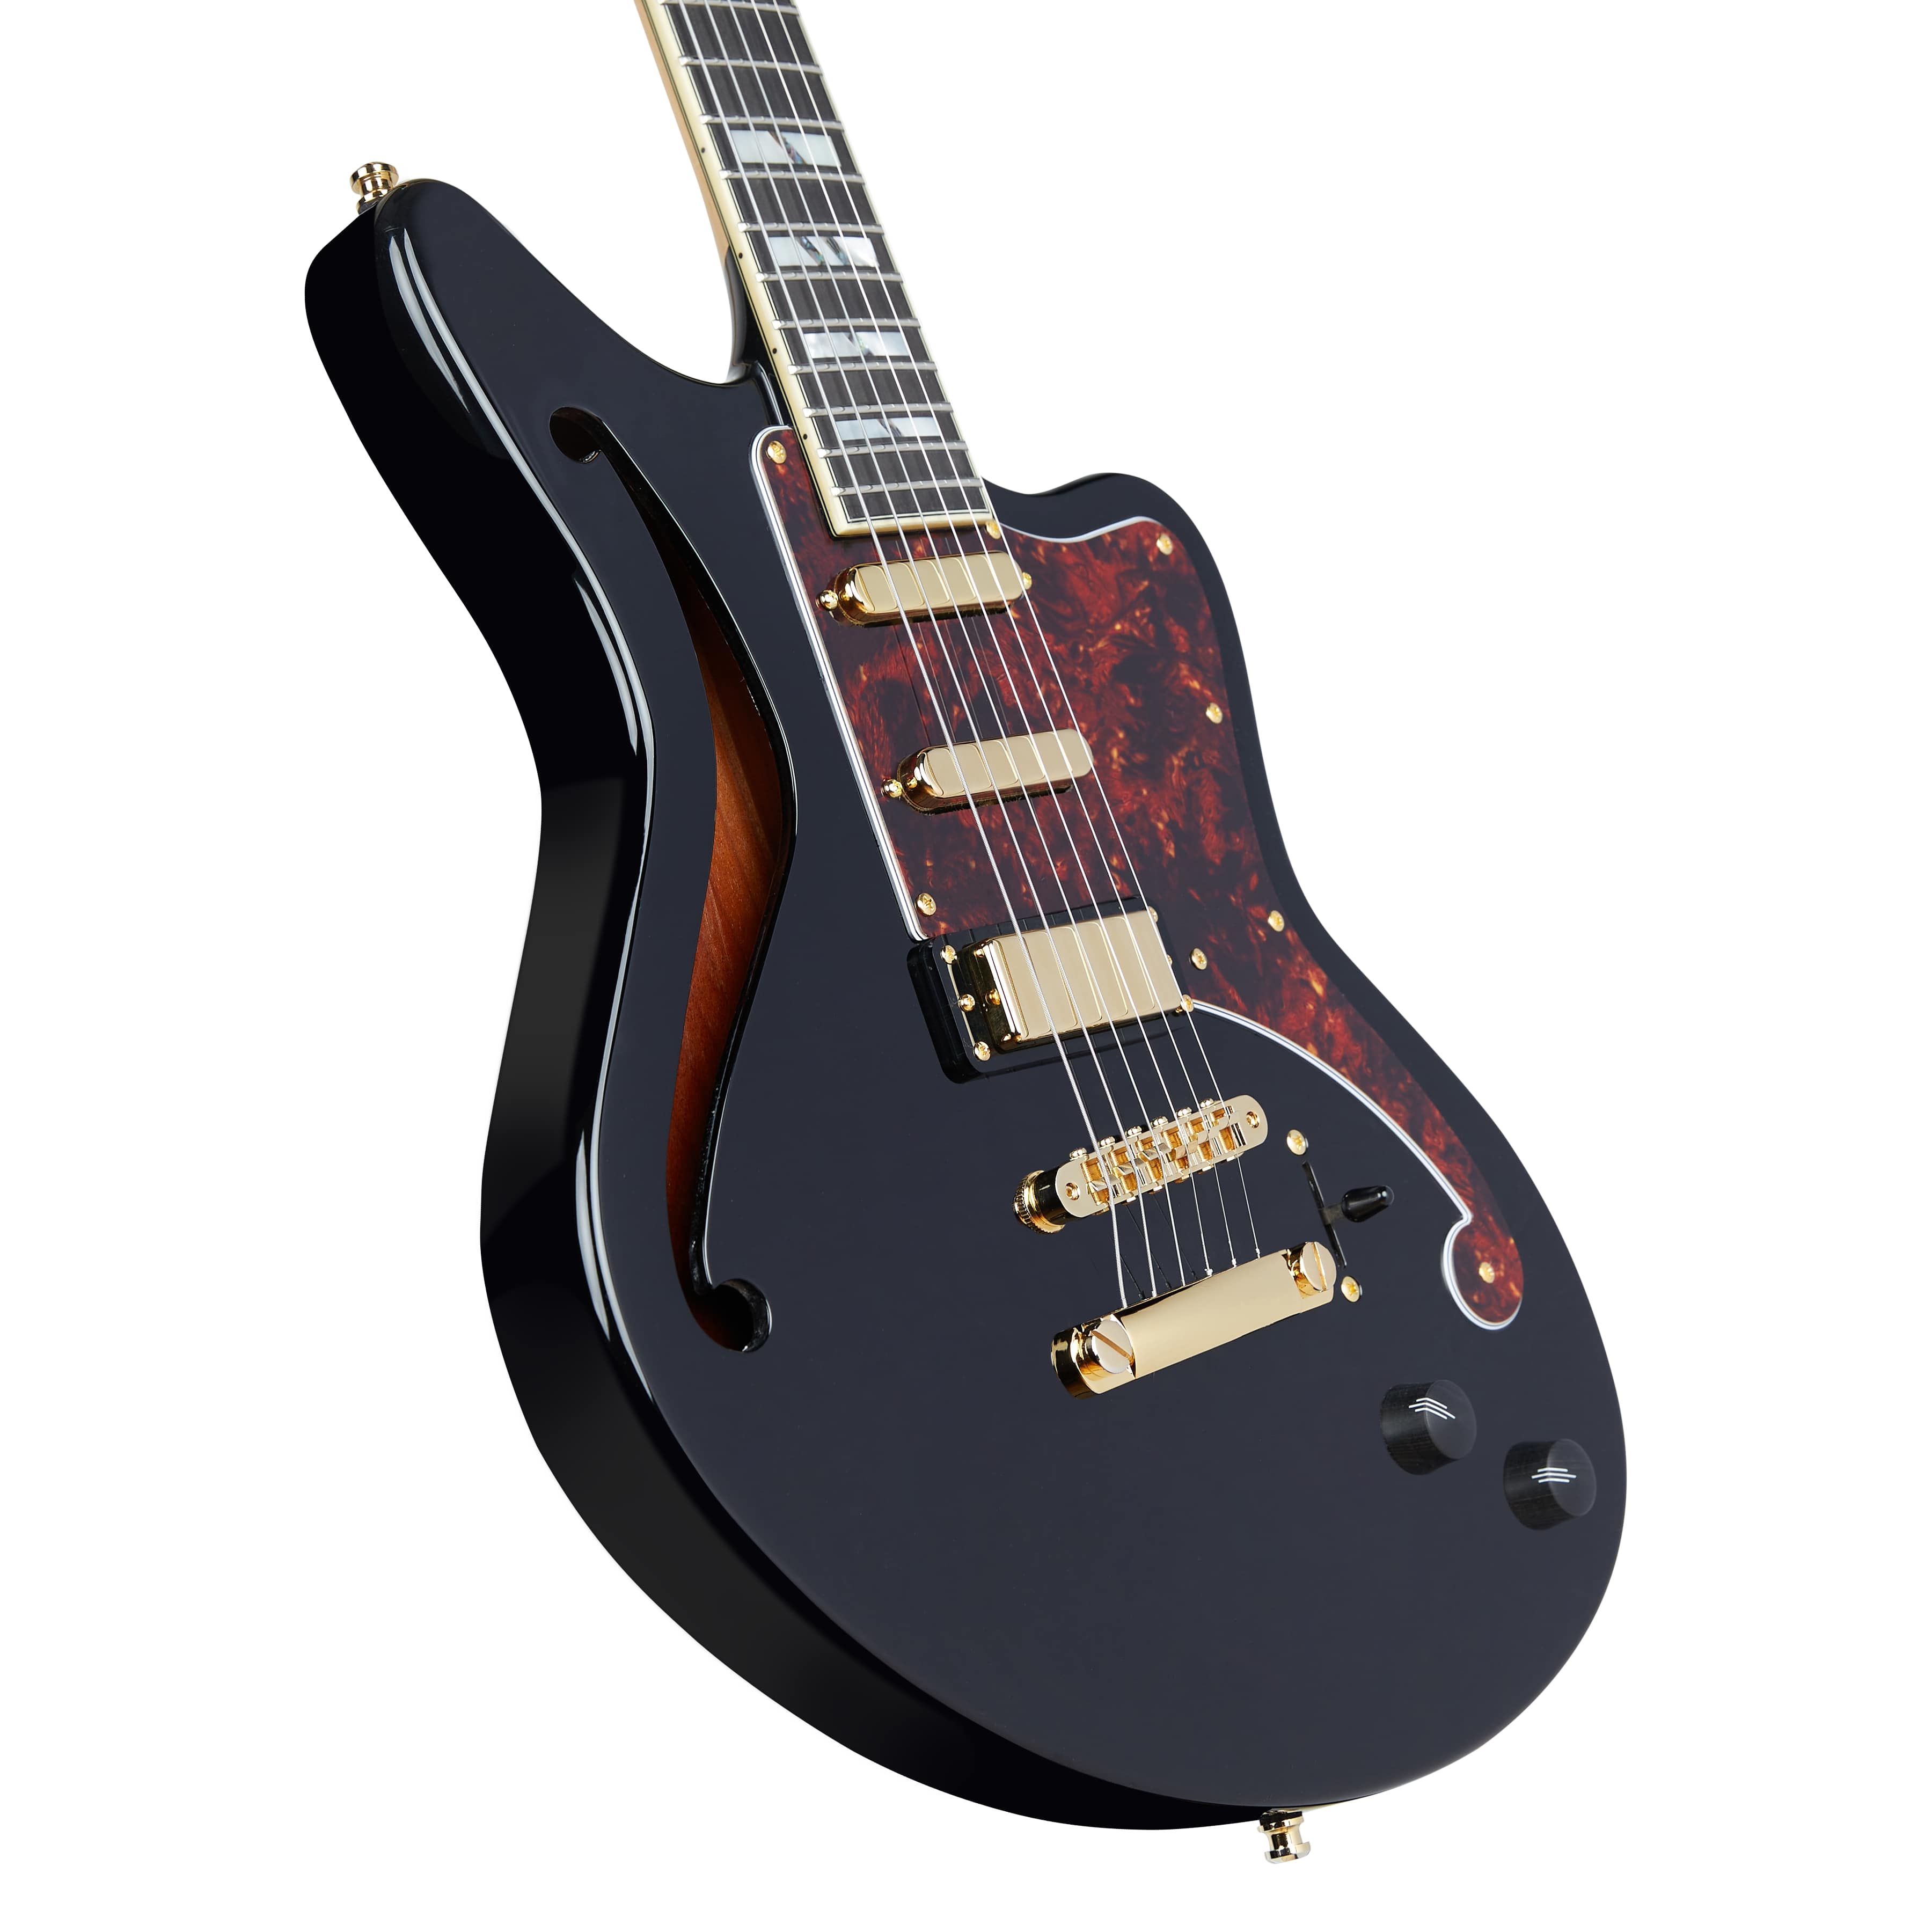 D'Angelico Deluxe Bedford SH Semi-hollowbody Electric Guitar, Black DADBEDSHSBKGS